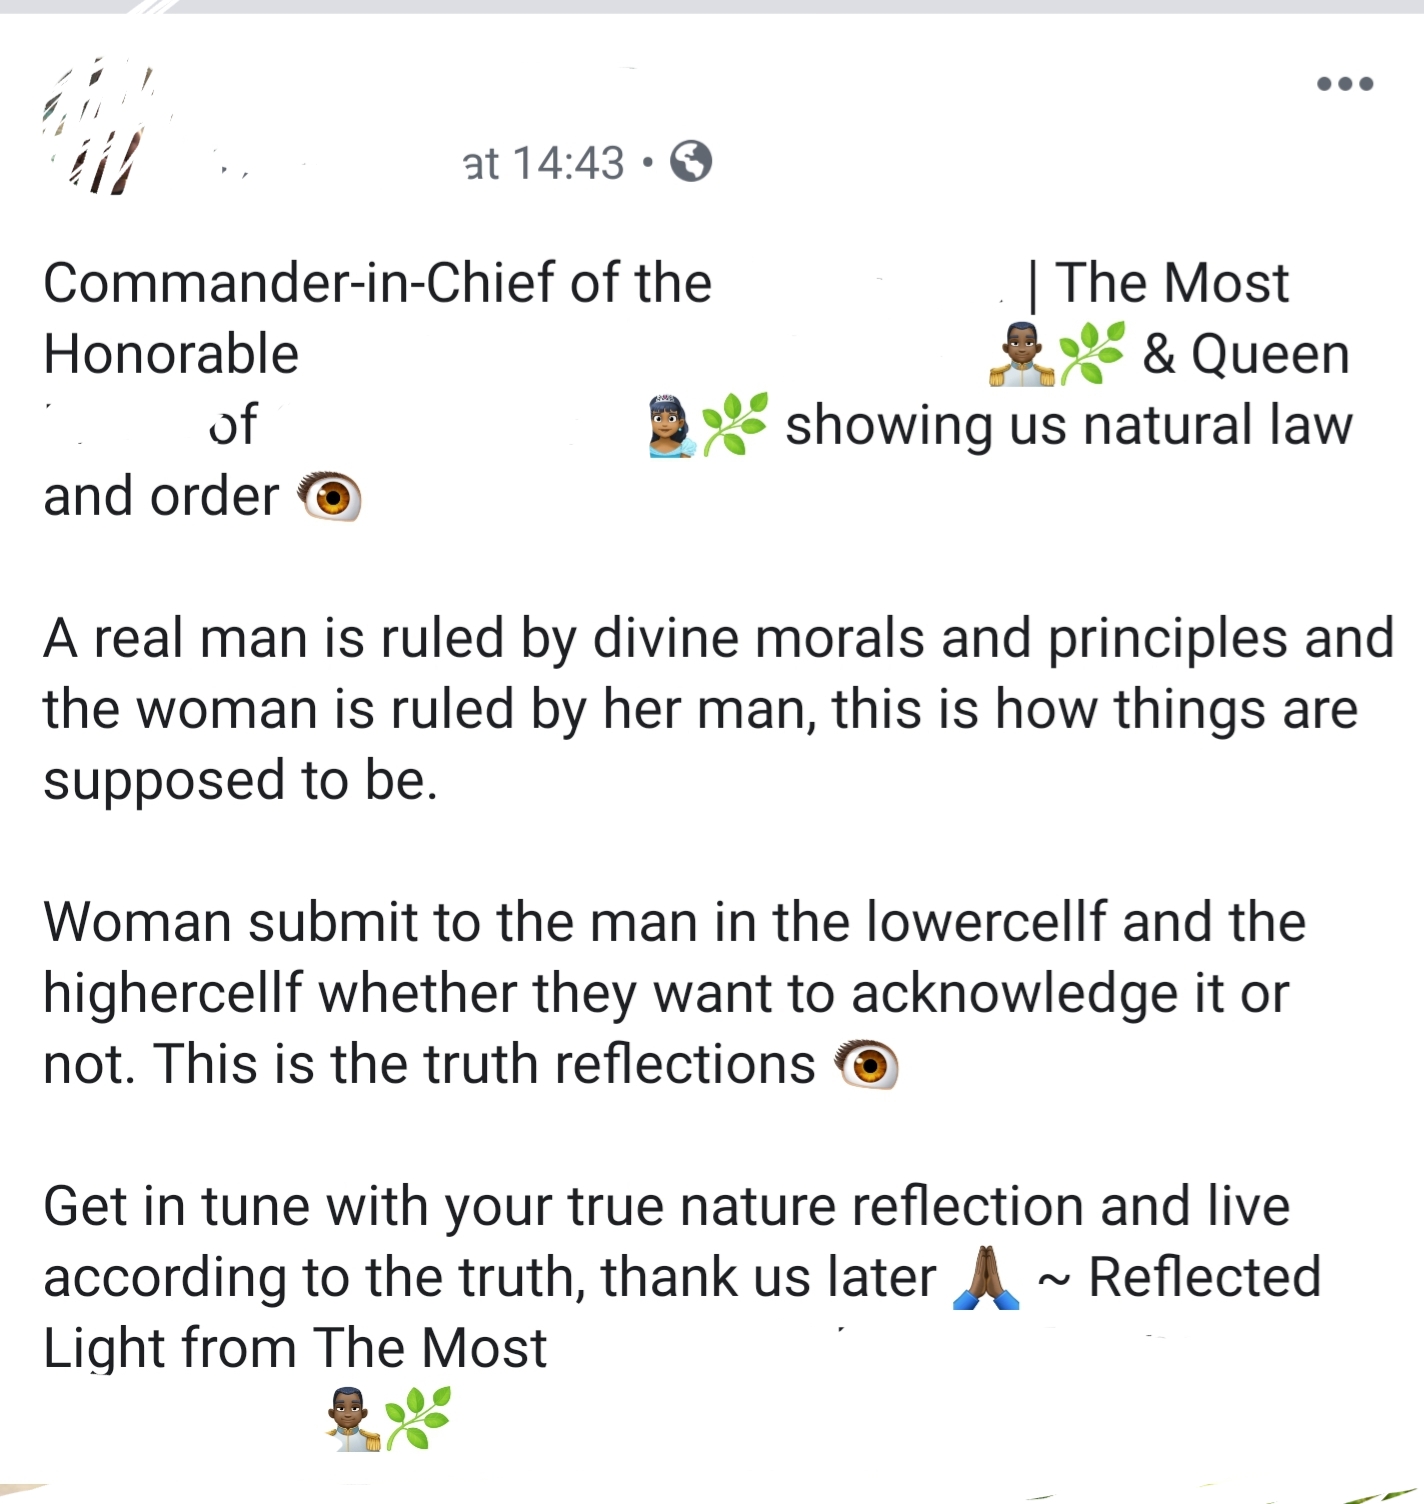 cringe pics - at CommanderinChief of the Honorable of and order | The Most & Queen showing us natural law A real man is ruled by divine morals and principles and the woman is ruled by her man, this is how things are supposed to be. Woman submit to the man